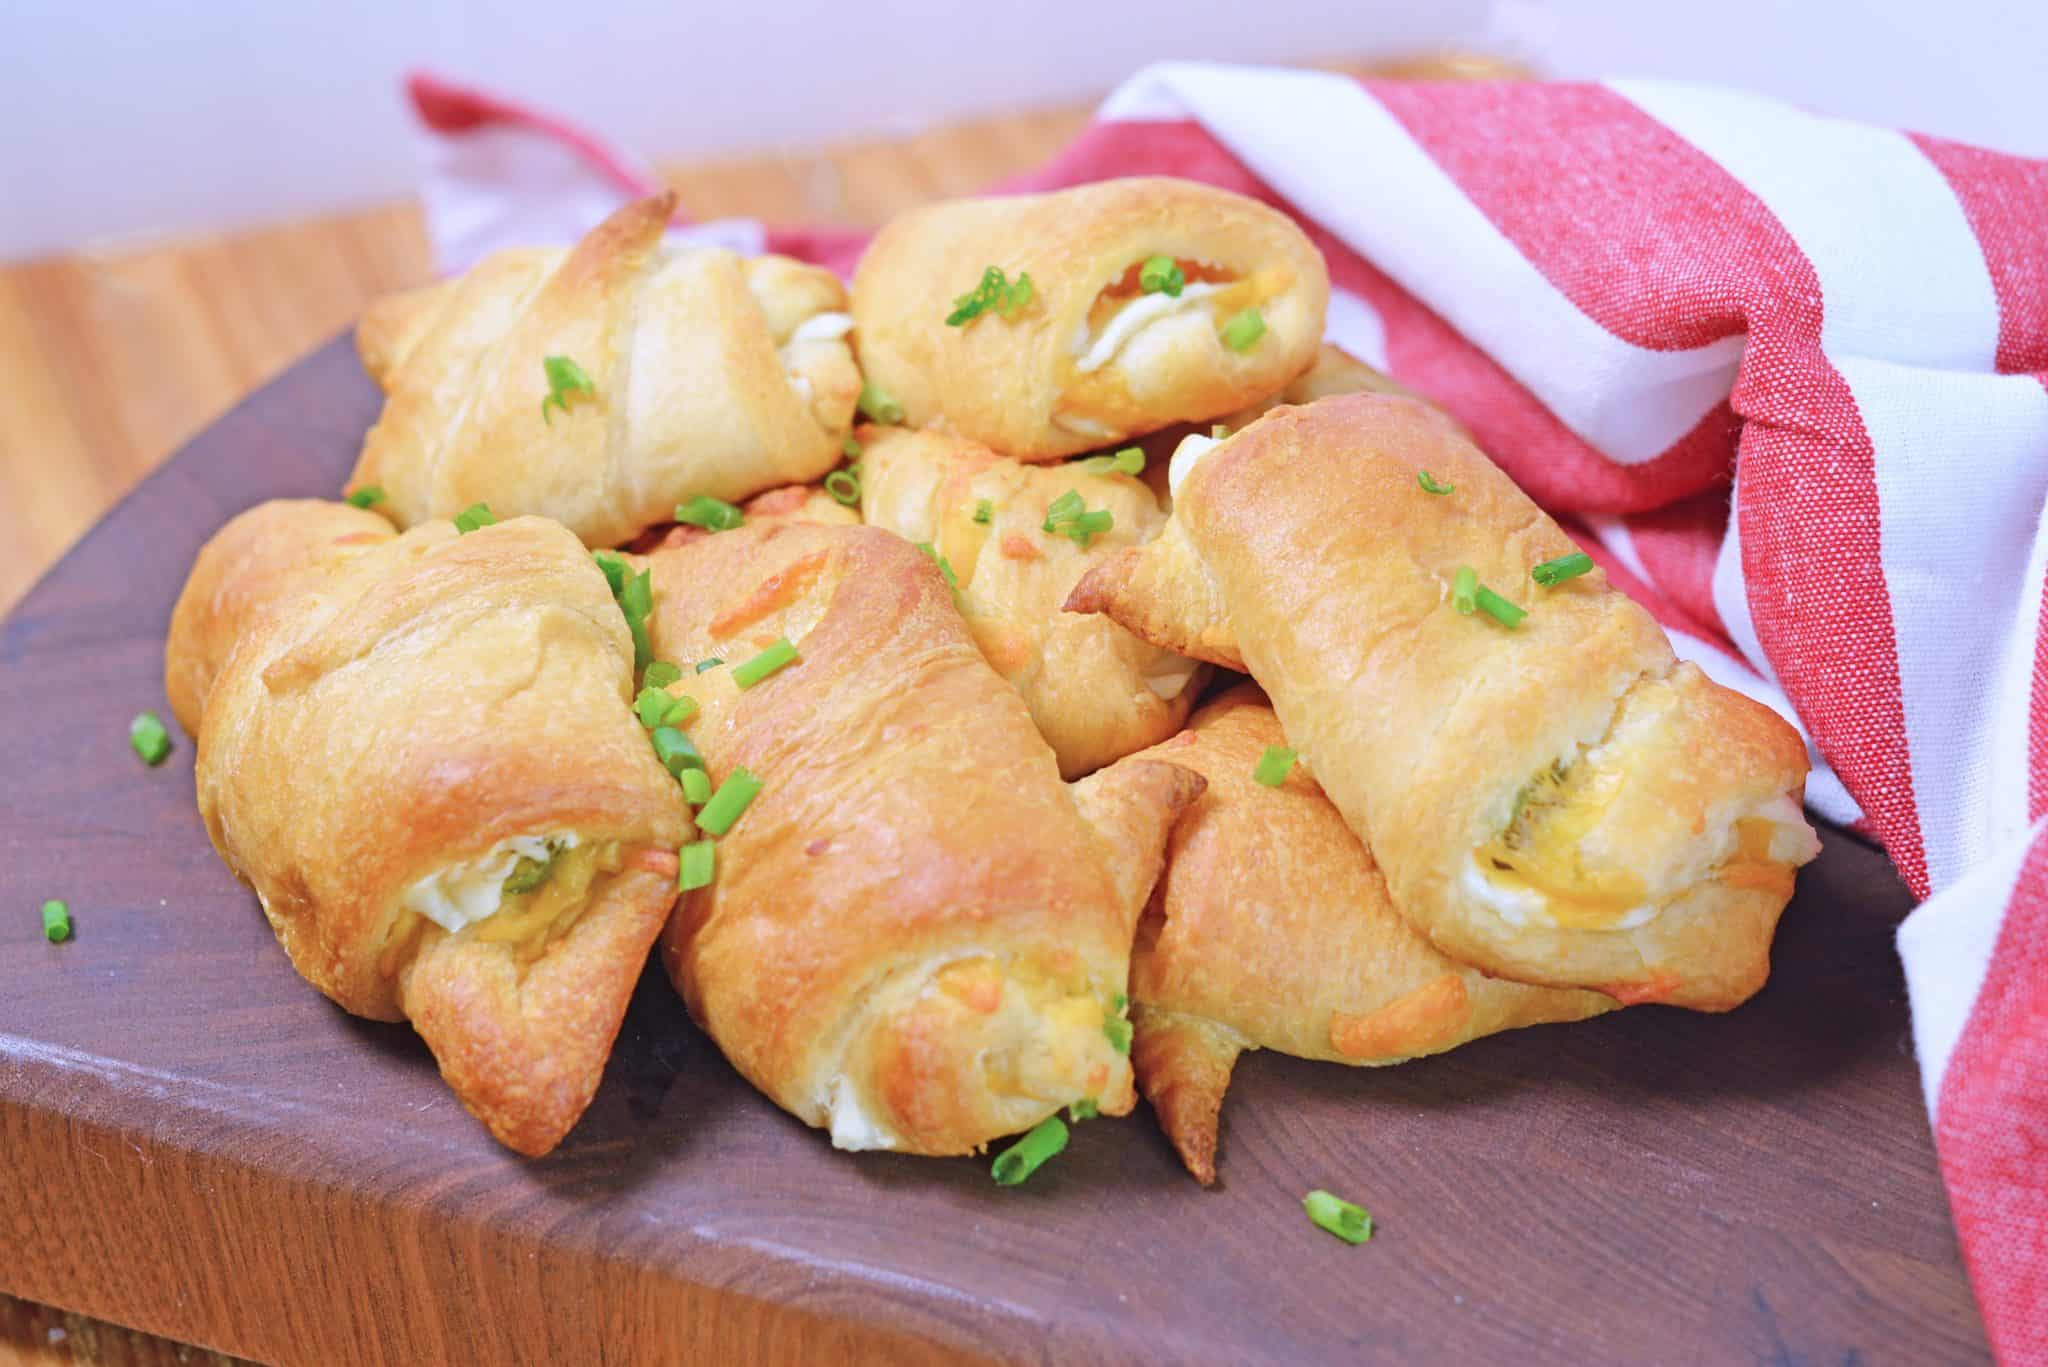 This Jalapeno Popper Crescent Rolls recipe is filled with cream cheese, jalapenos, and cheddar cheese wrapped in a flaky croissant dough. #crescentrollrecipes #crescentrollappetizers www.savoryexperiments.com